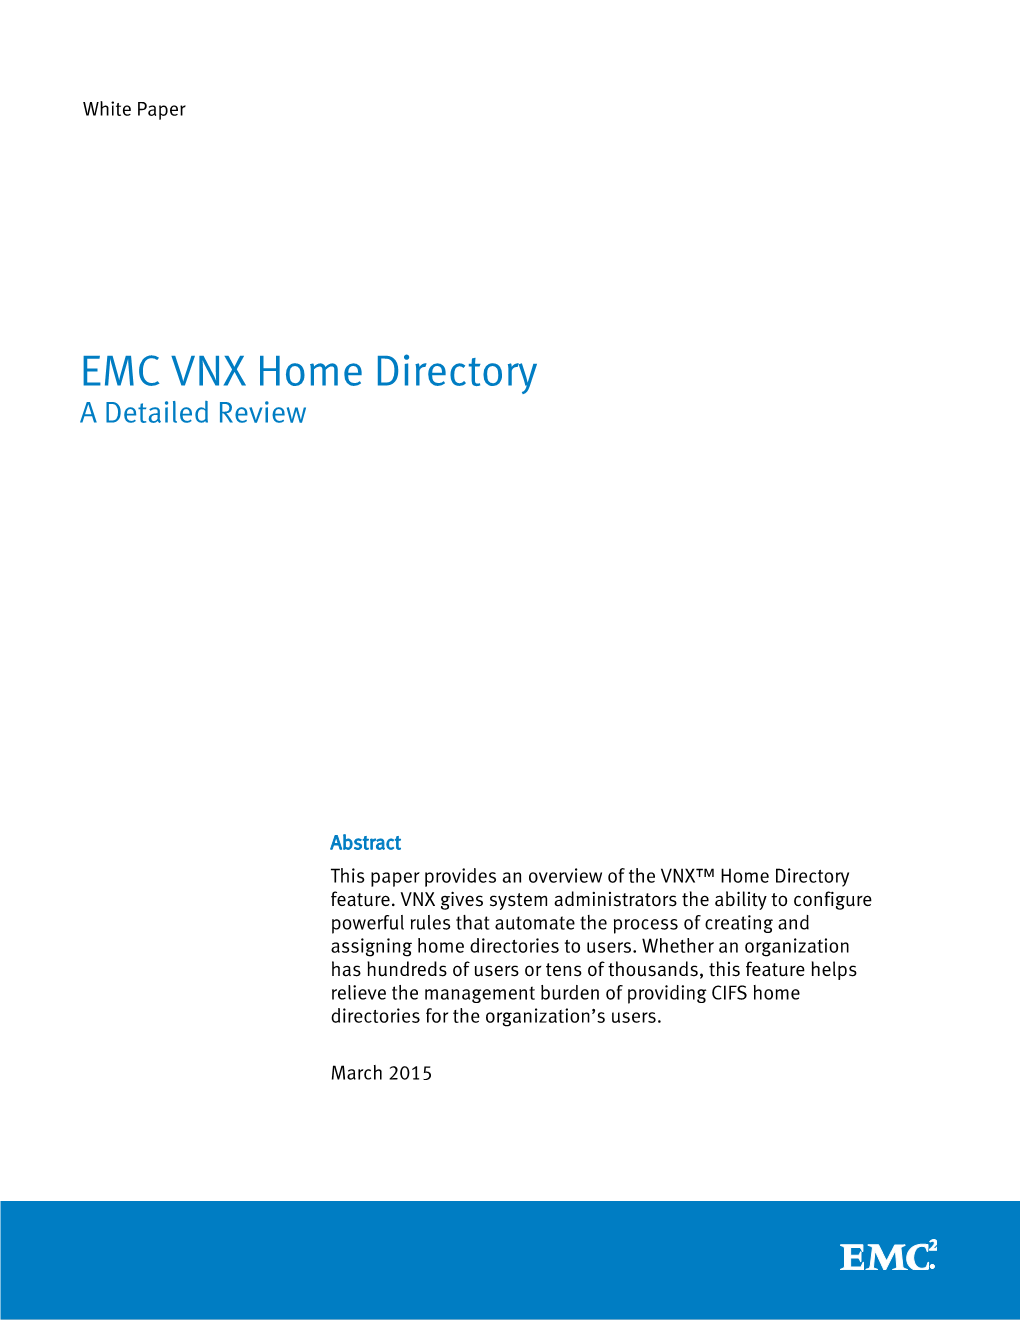 EMC VNX Home Directory a Detailed Review